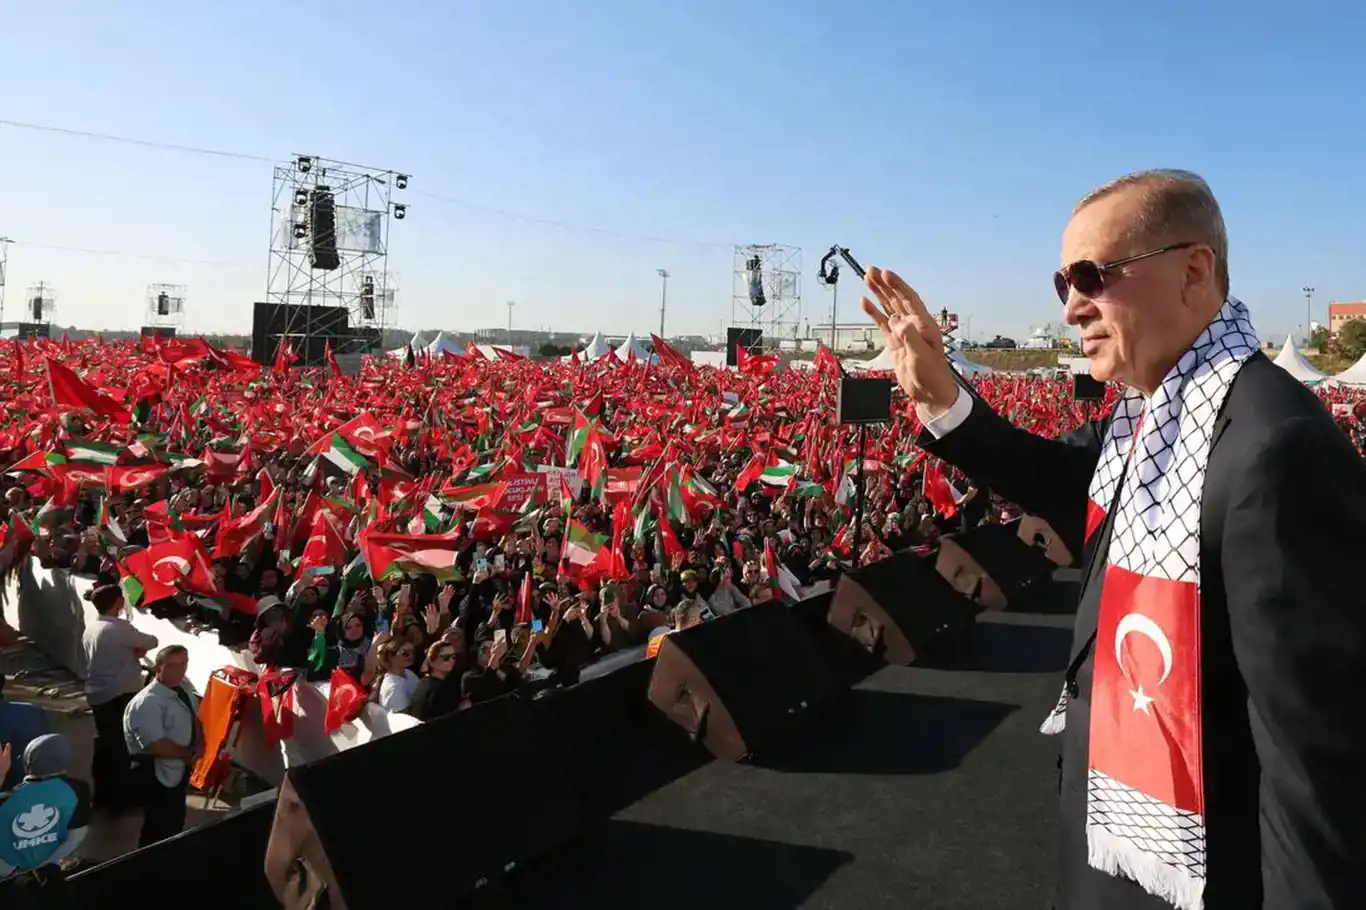 Erdogan slams israel and West in speech at pro-Palestine rally